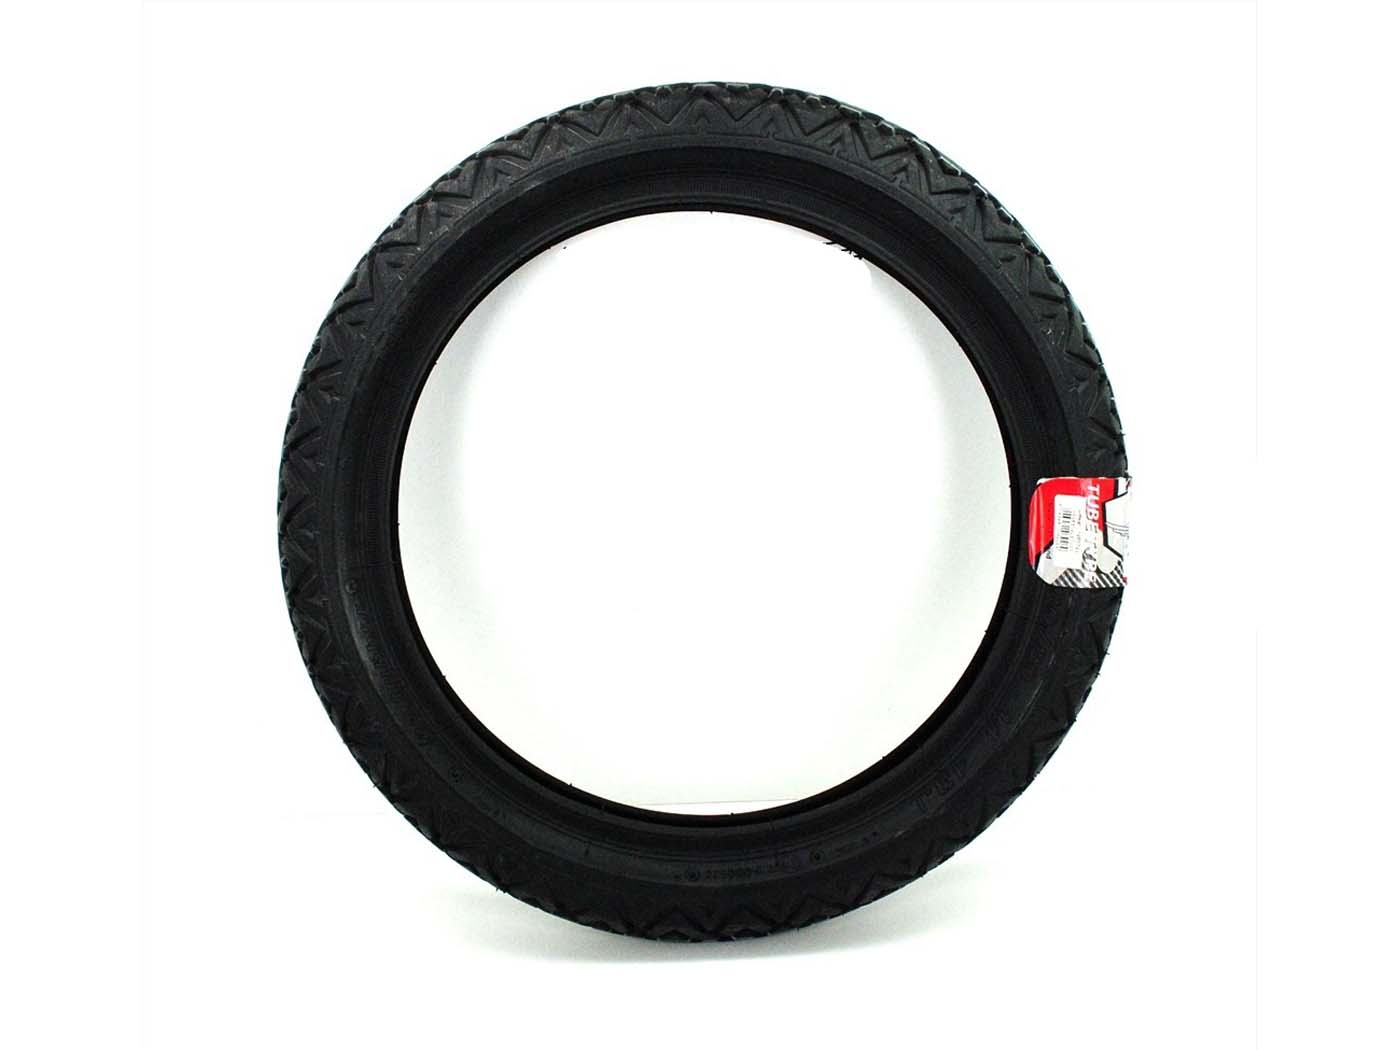 Tires Vee Rubber 2 1/2 X 14 Inch Front Wheel For Puch Maxi Chopper Moped